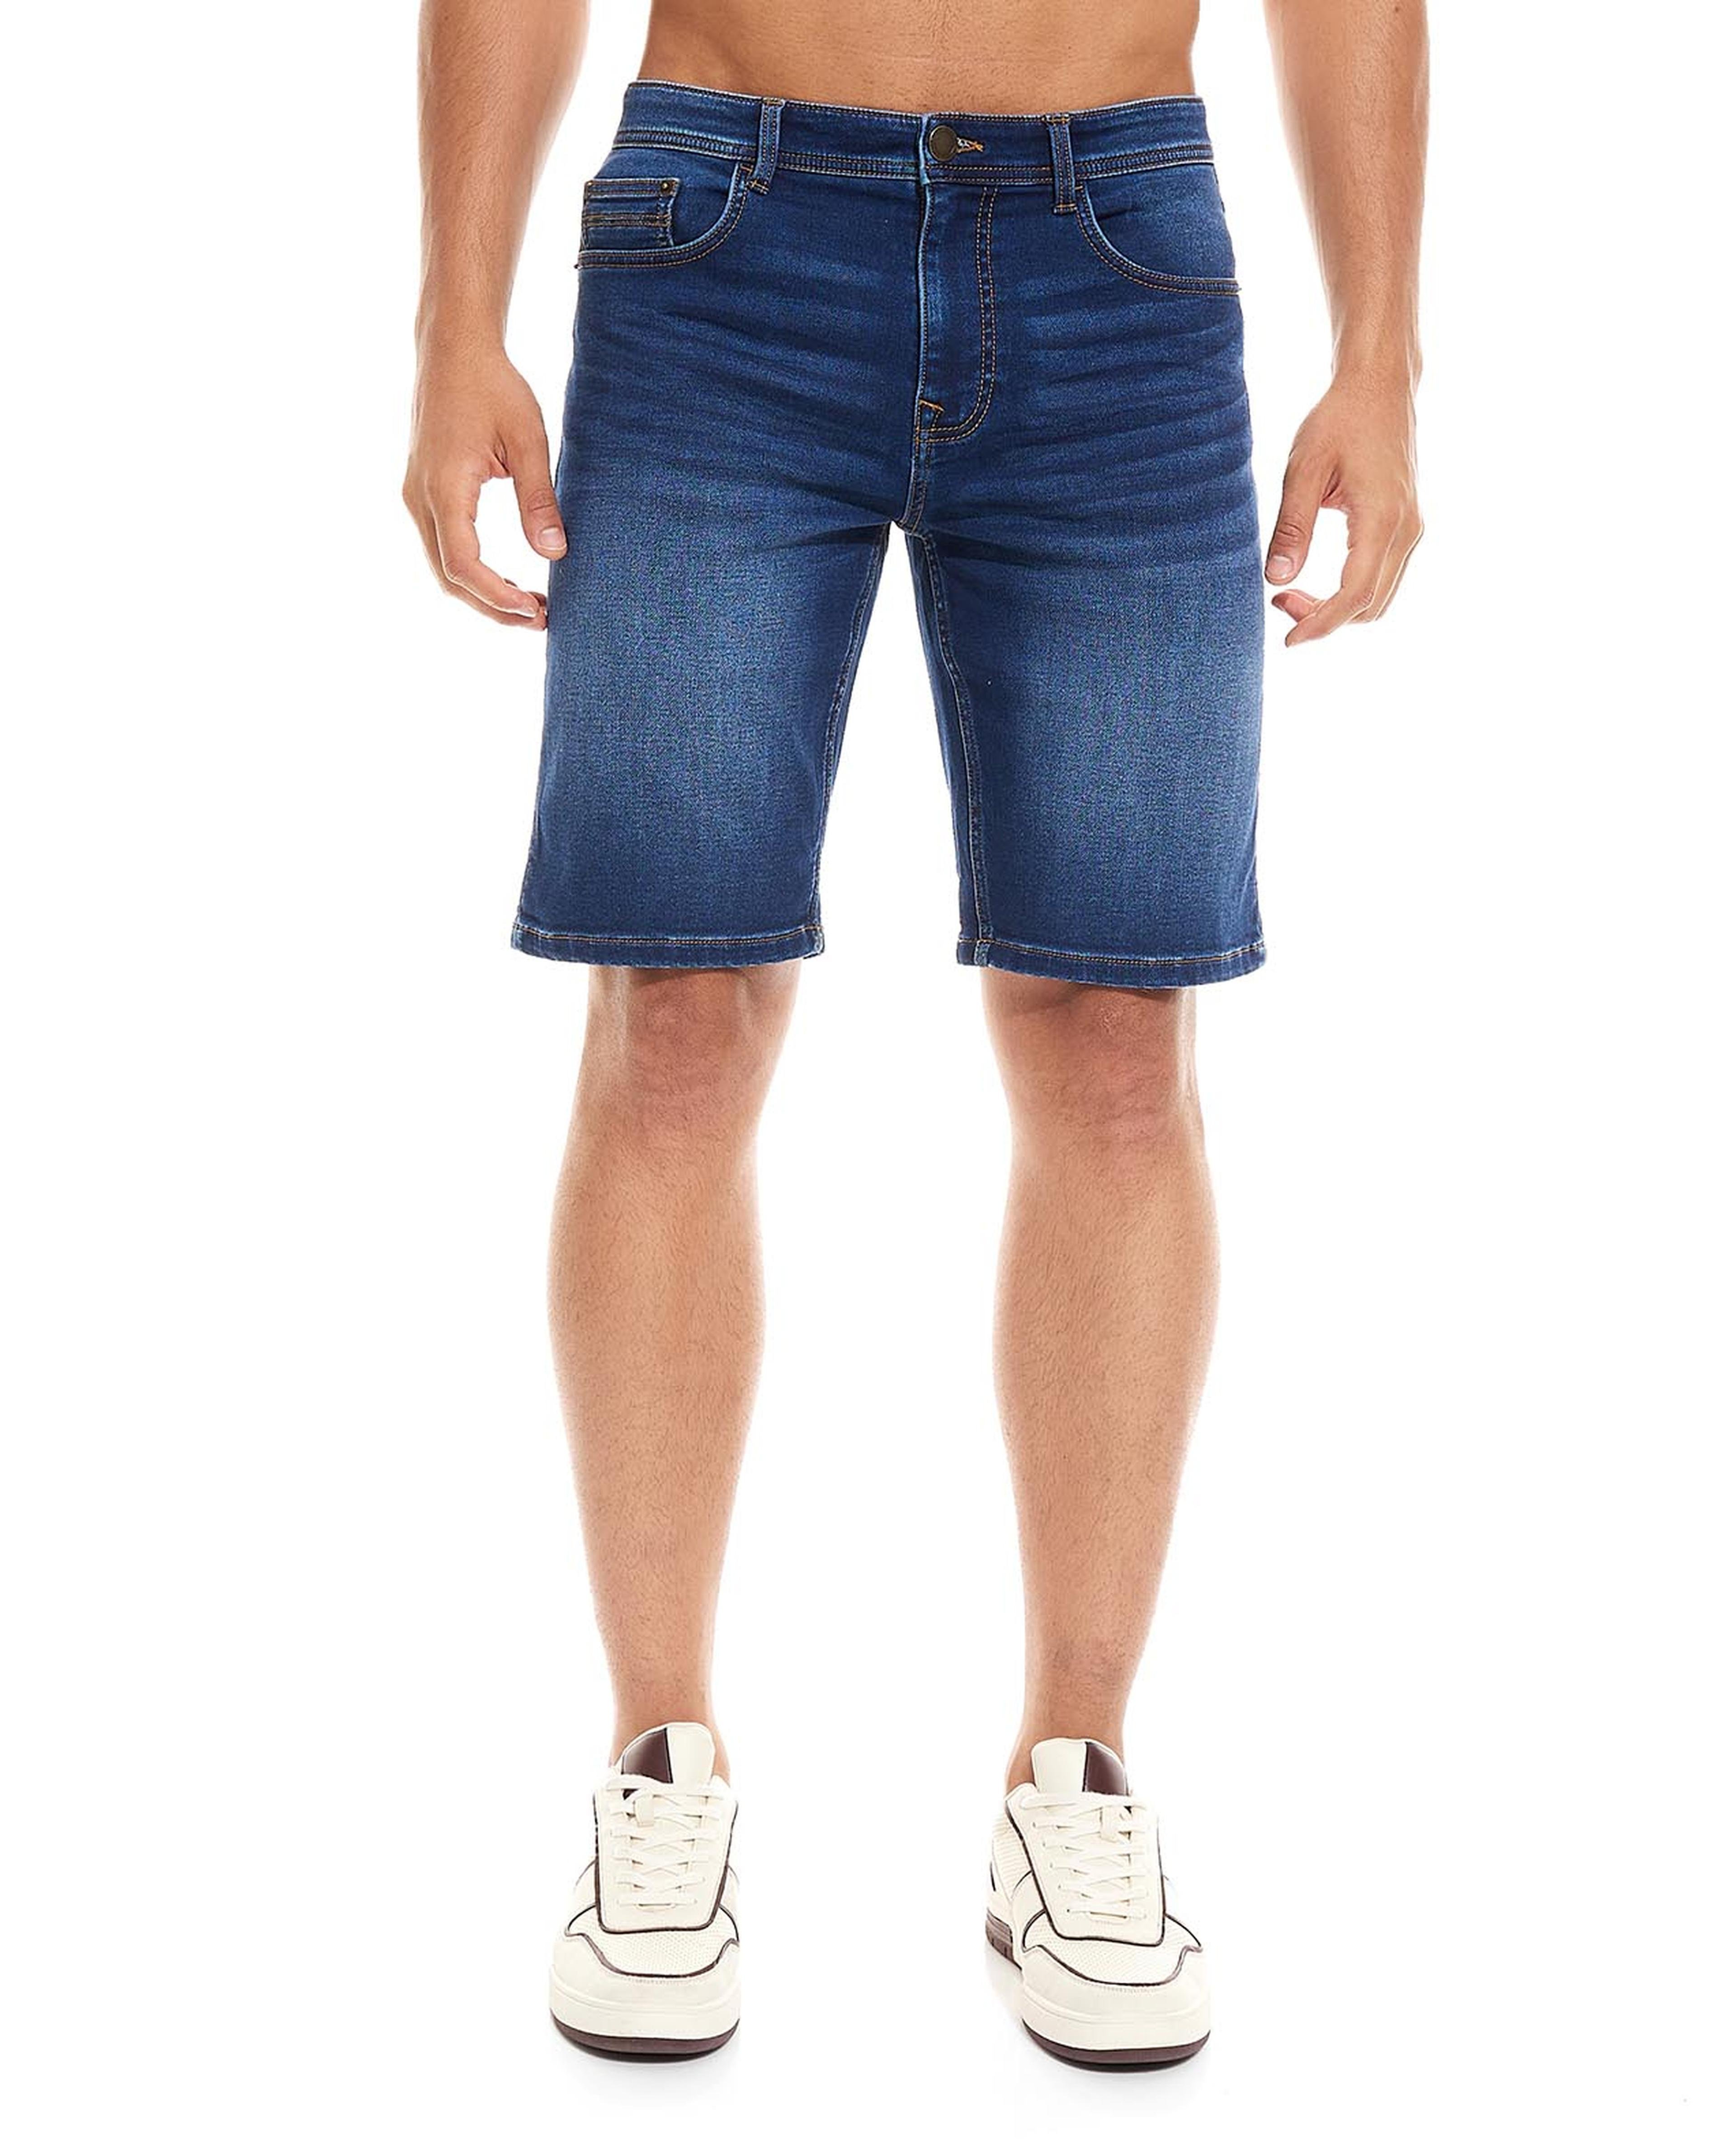 Faded Denim Shorts with Button Closure